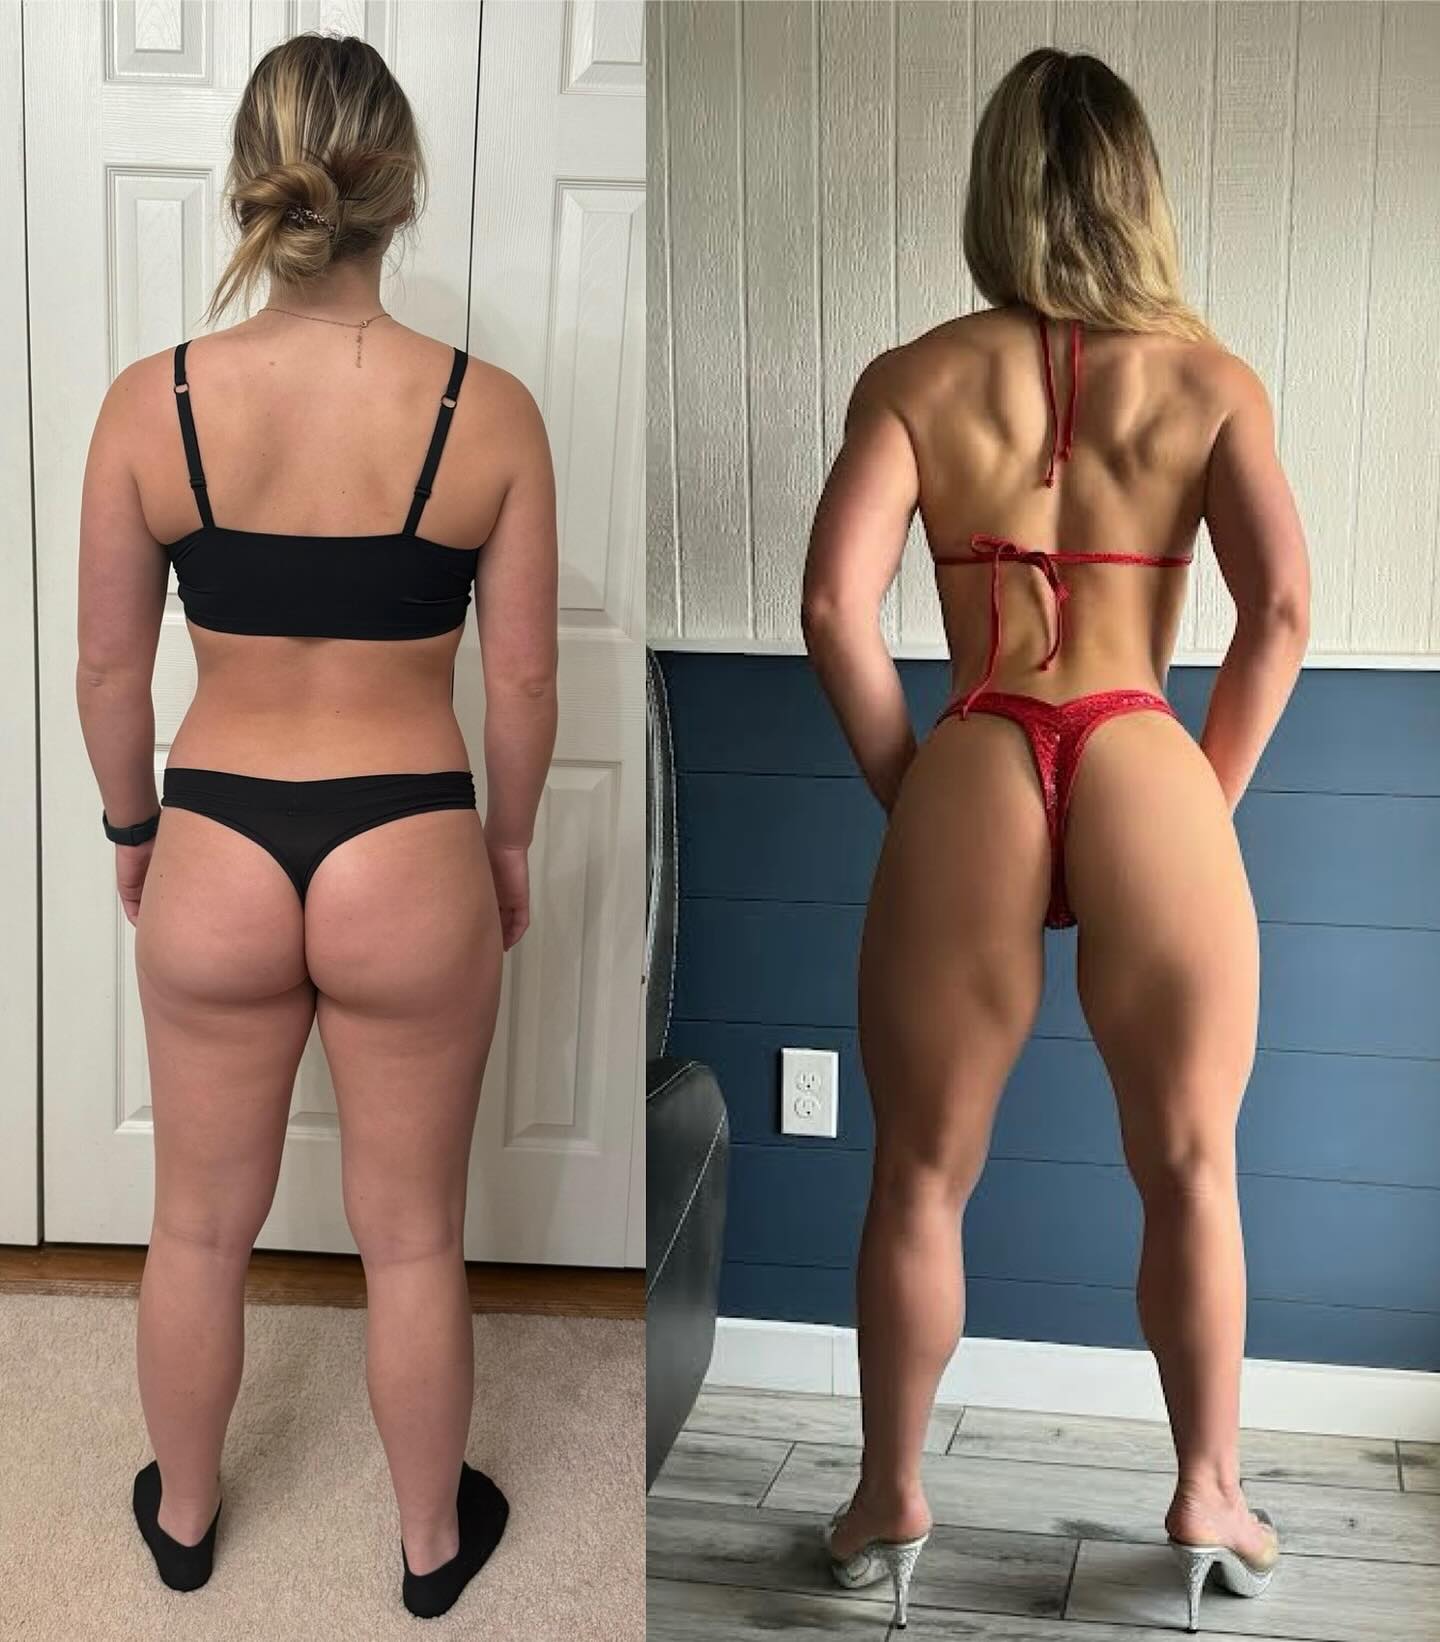 @halie_smith97 - your killing it girl!!!! 

💯 on top of the game! Your check ins get better and better every very week!!! 

Halie is doing her first NPC wellness show in 2 weeks - she’s 26 years old and 18 months post partum!!!! Crazy right!

Anything is possible if you put your mind to it! 
Left is 1-15-24 at 160lbs
Right is 4-21-24 at 144lbs 

So excited to watch you shine on stage girl!! 
Let’s do this!!!! So proud of you!!! ✨